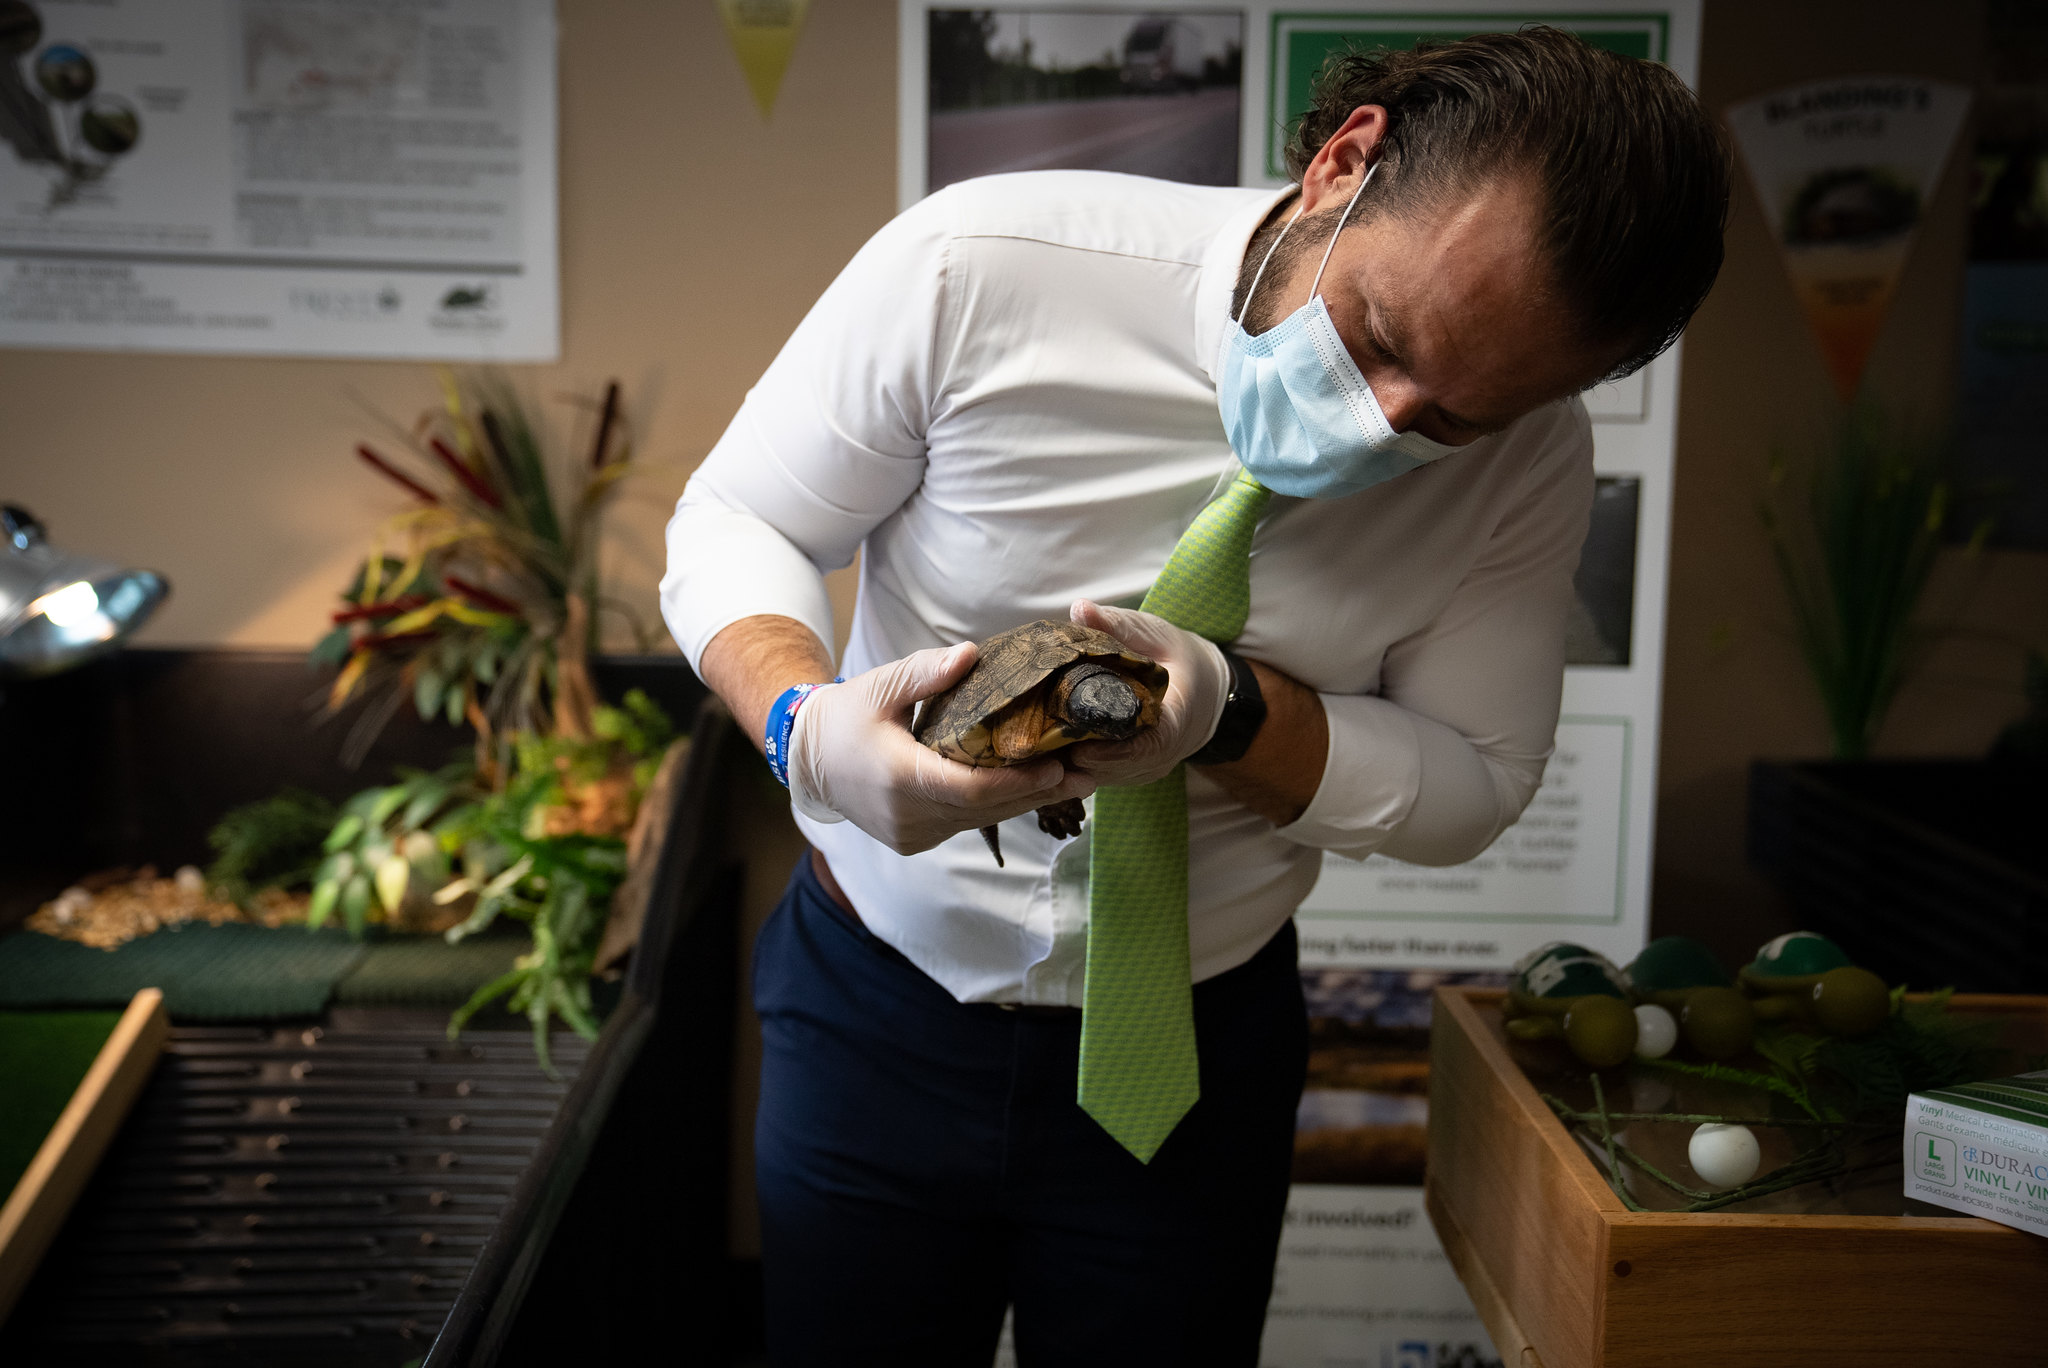 Ontario Environment Minister David Piccini holds a turtle in gloved hands and leans over to examine it.